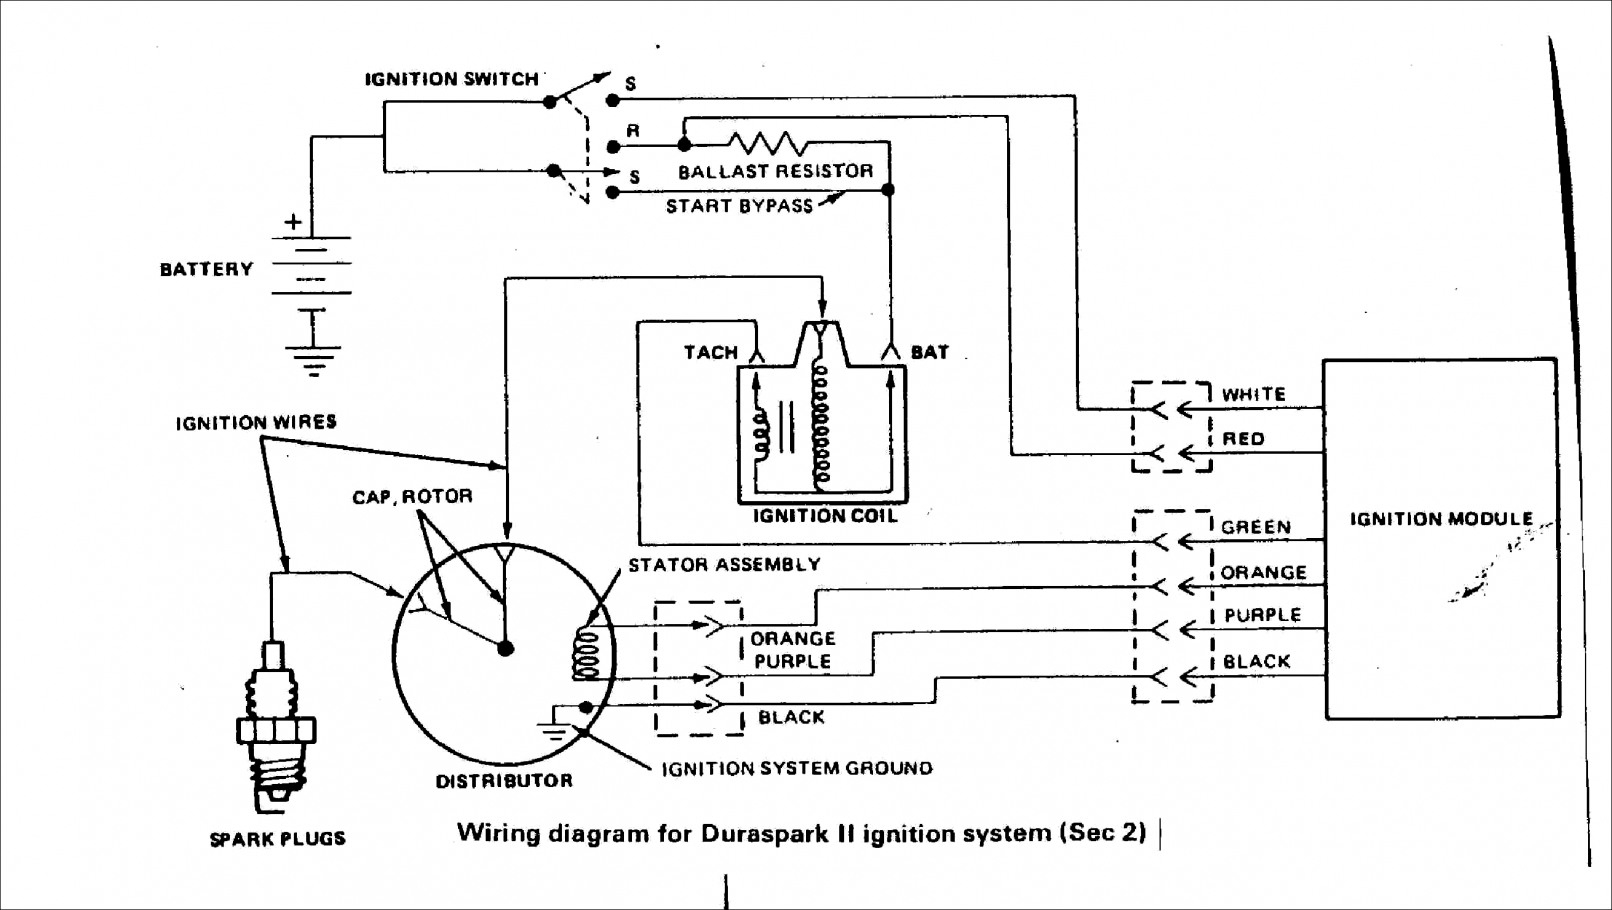 3 Position Ignition Switch Wiring Diagram from annawiringdiagram.com